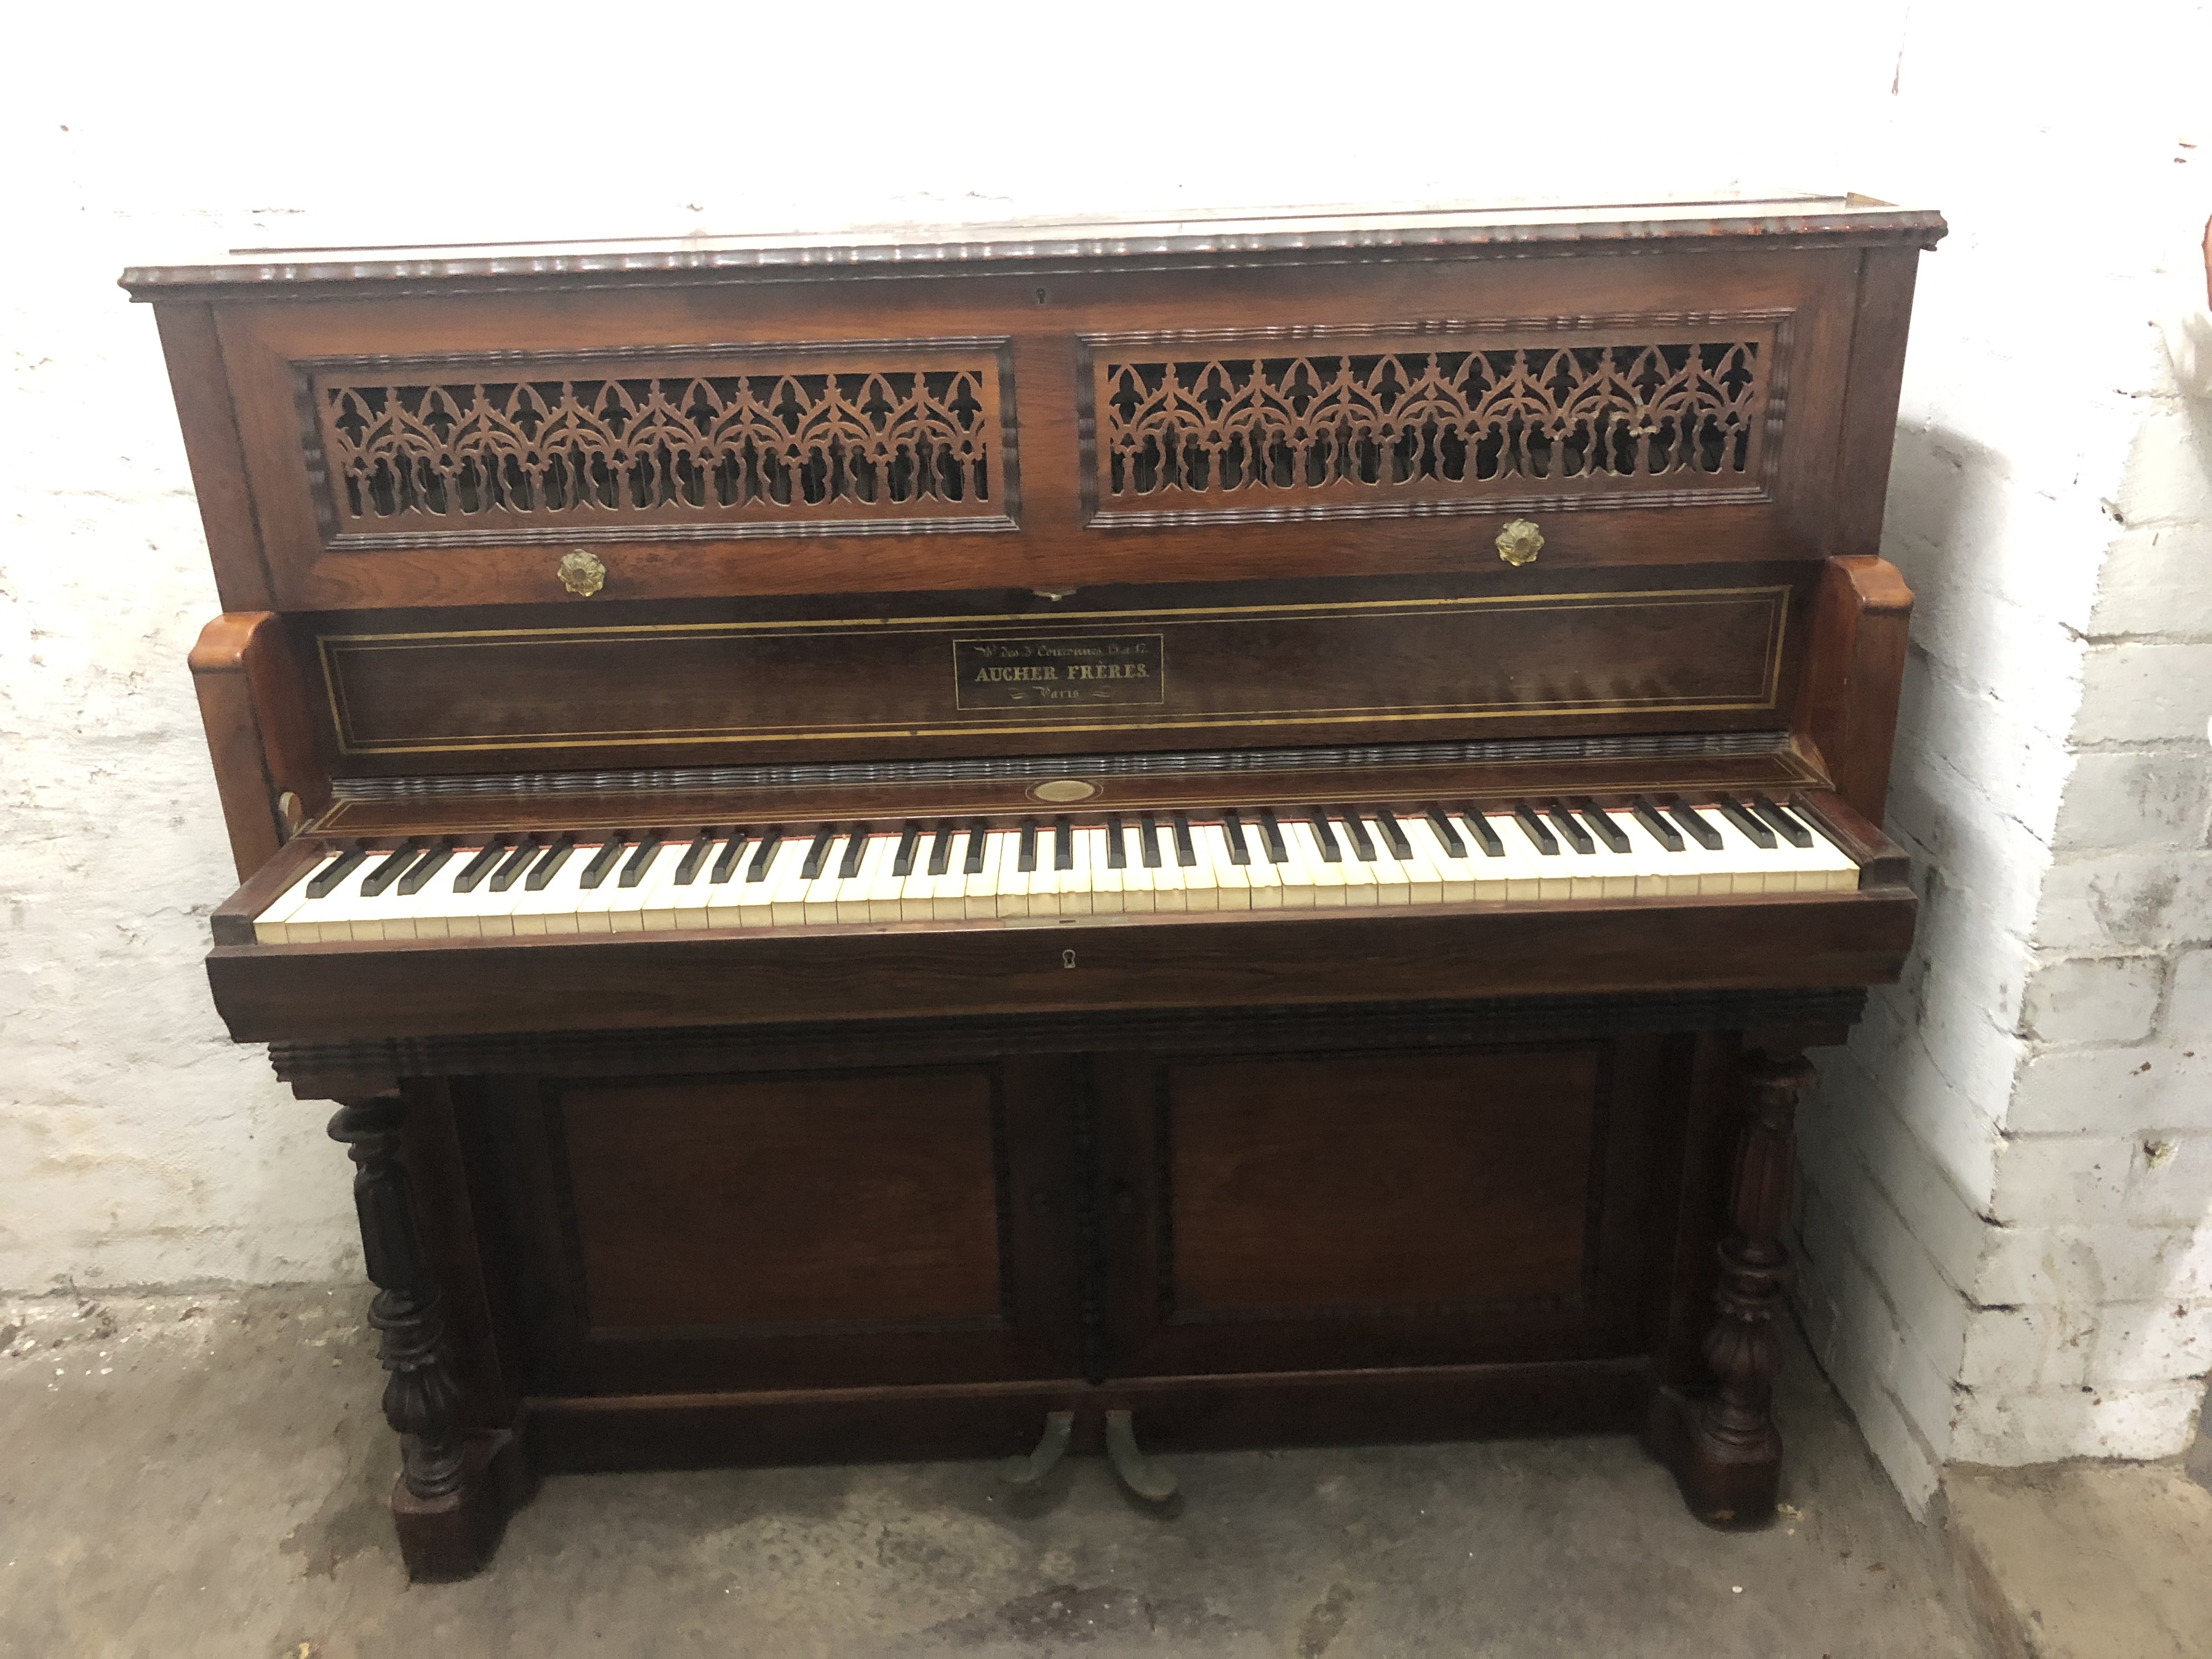 Antique French piano, rare folding keybooard